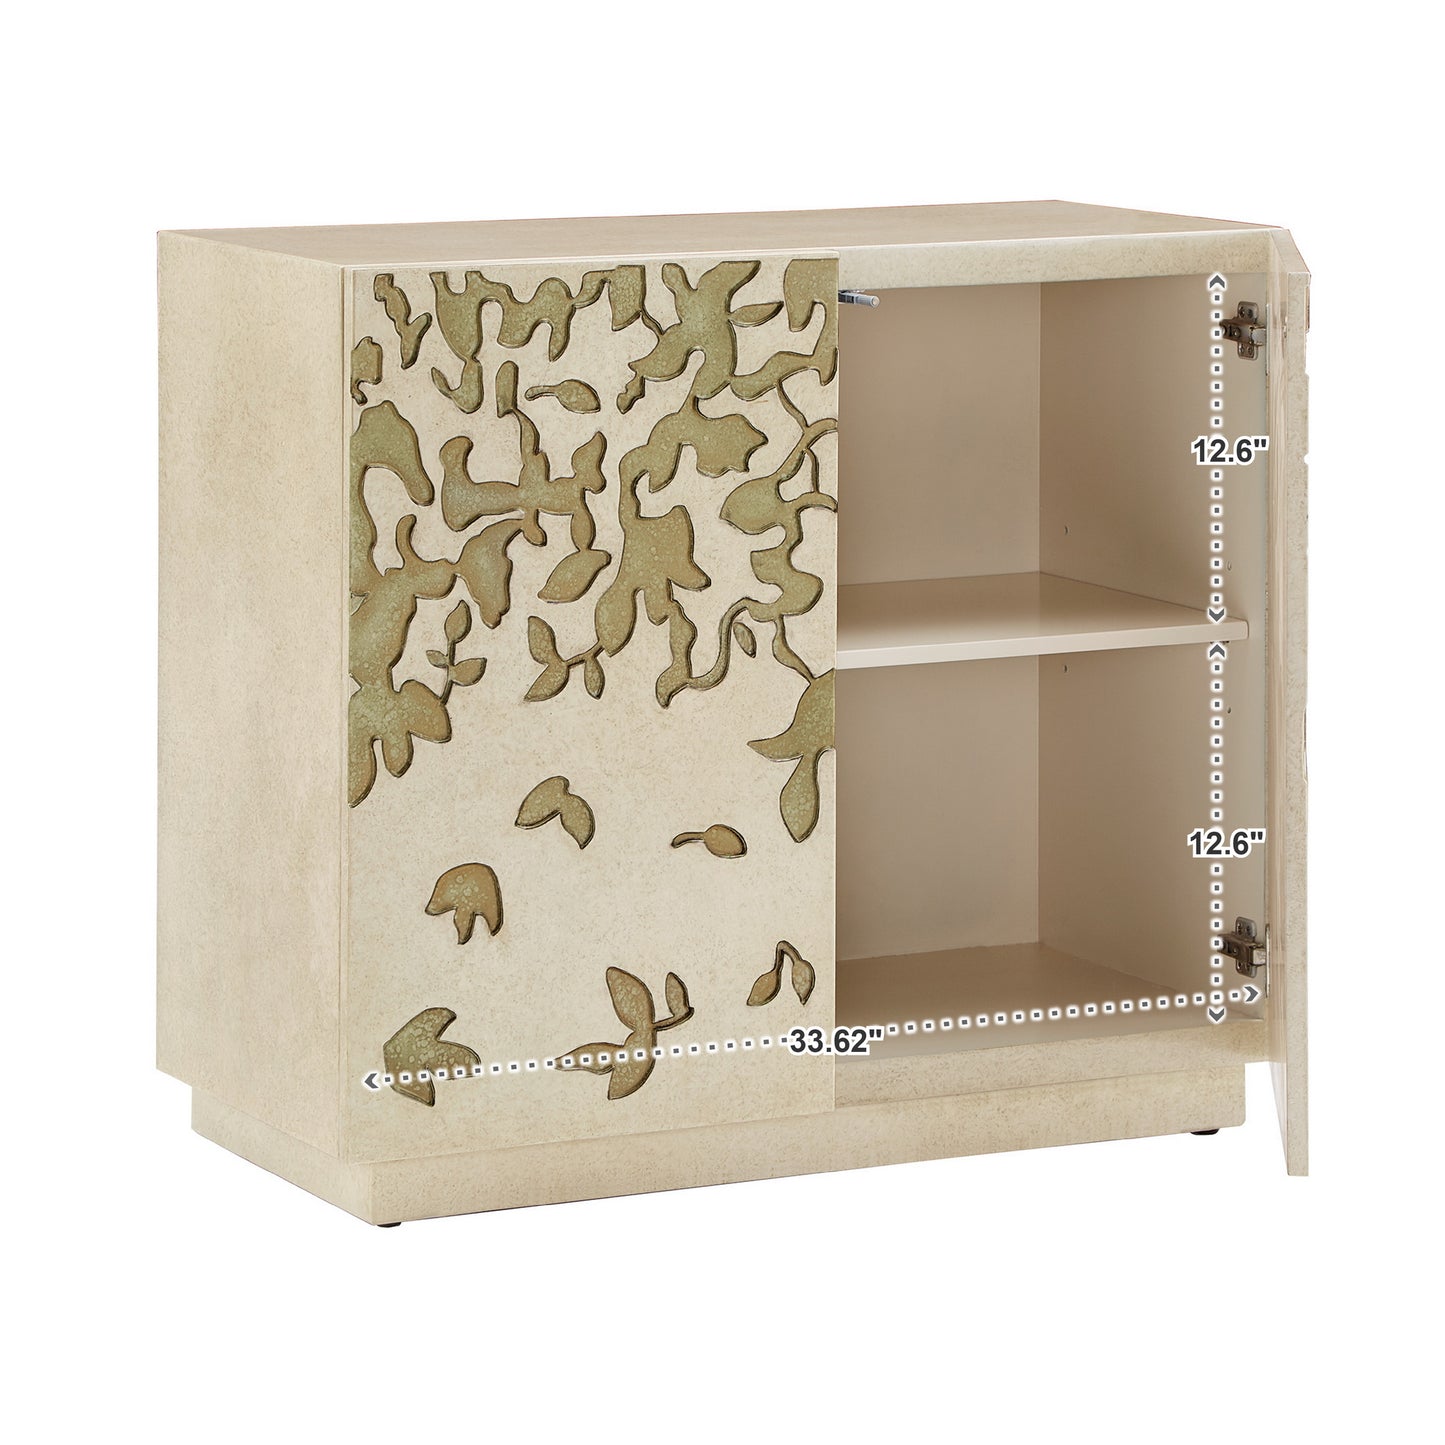 35" Wide 2-Door Hand-Painted Accent Cabinet - Antique White, Gold Finish